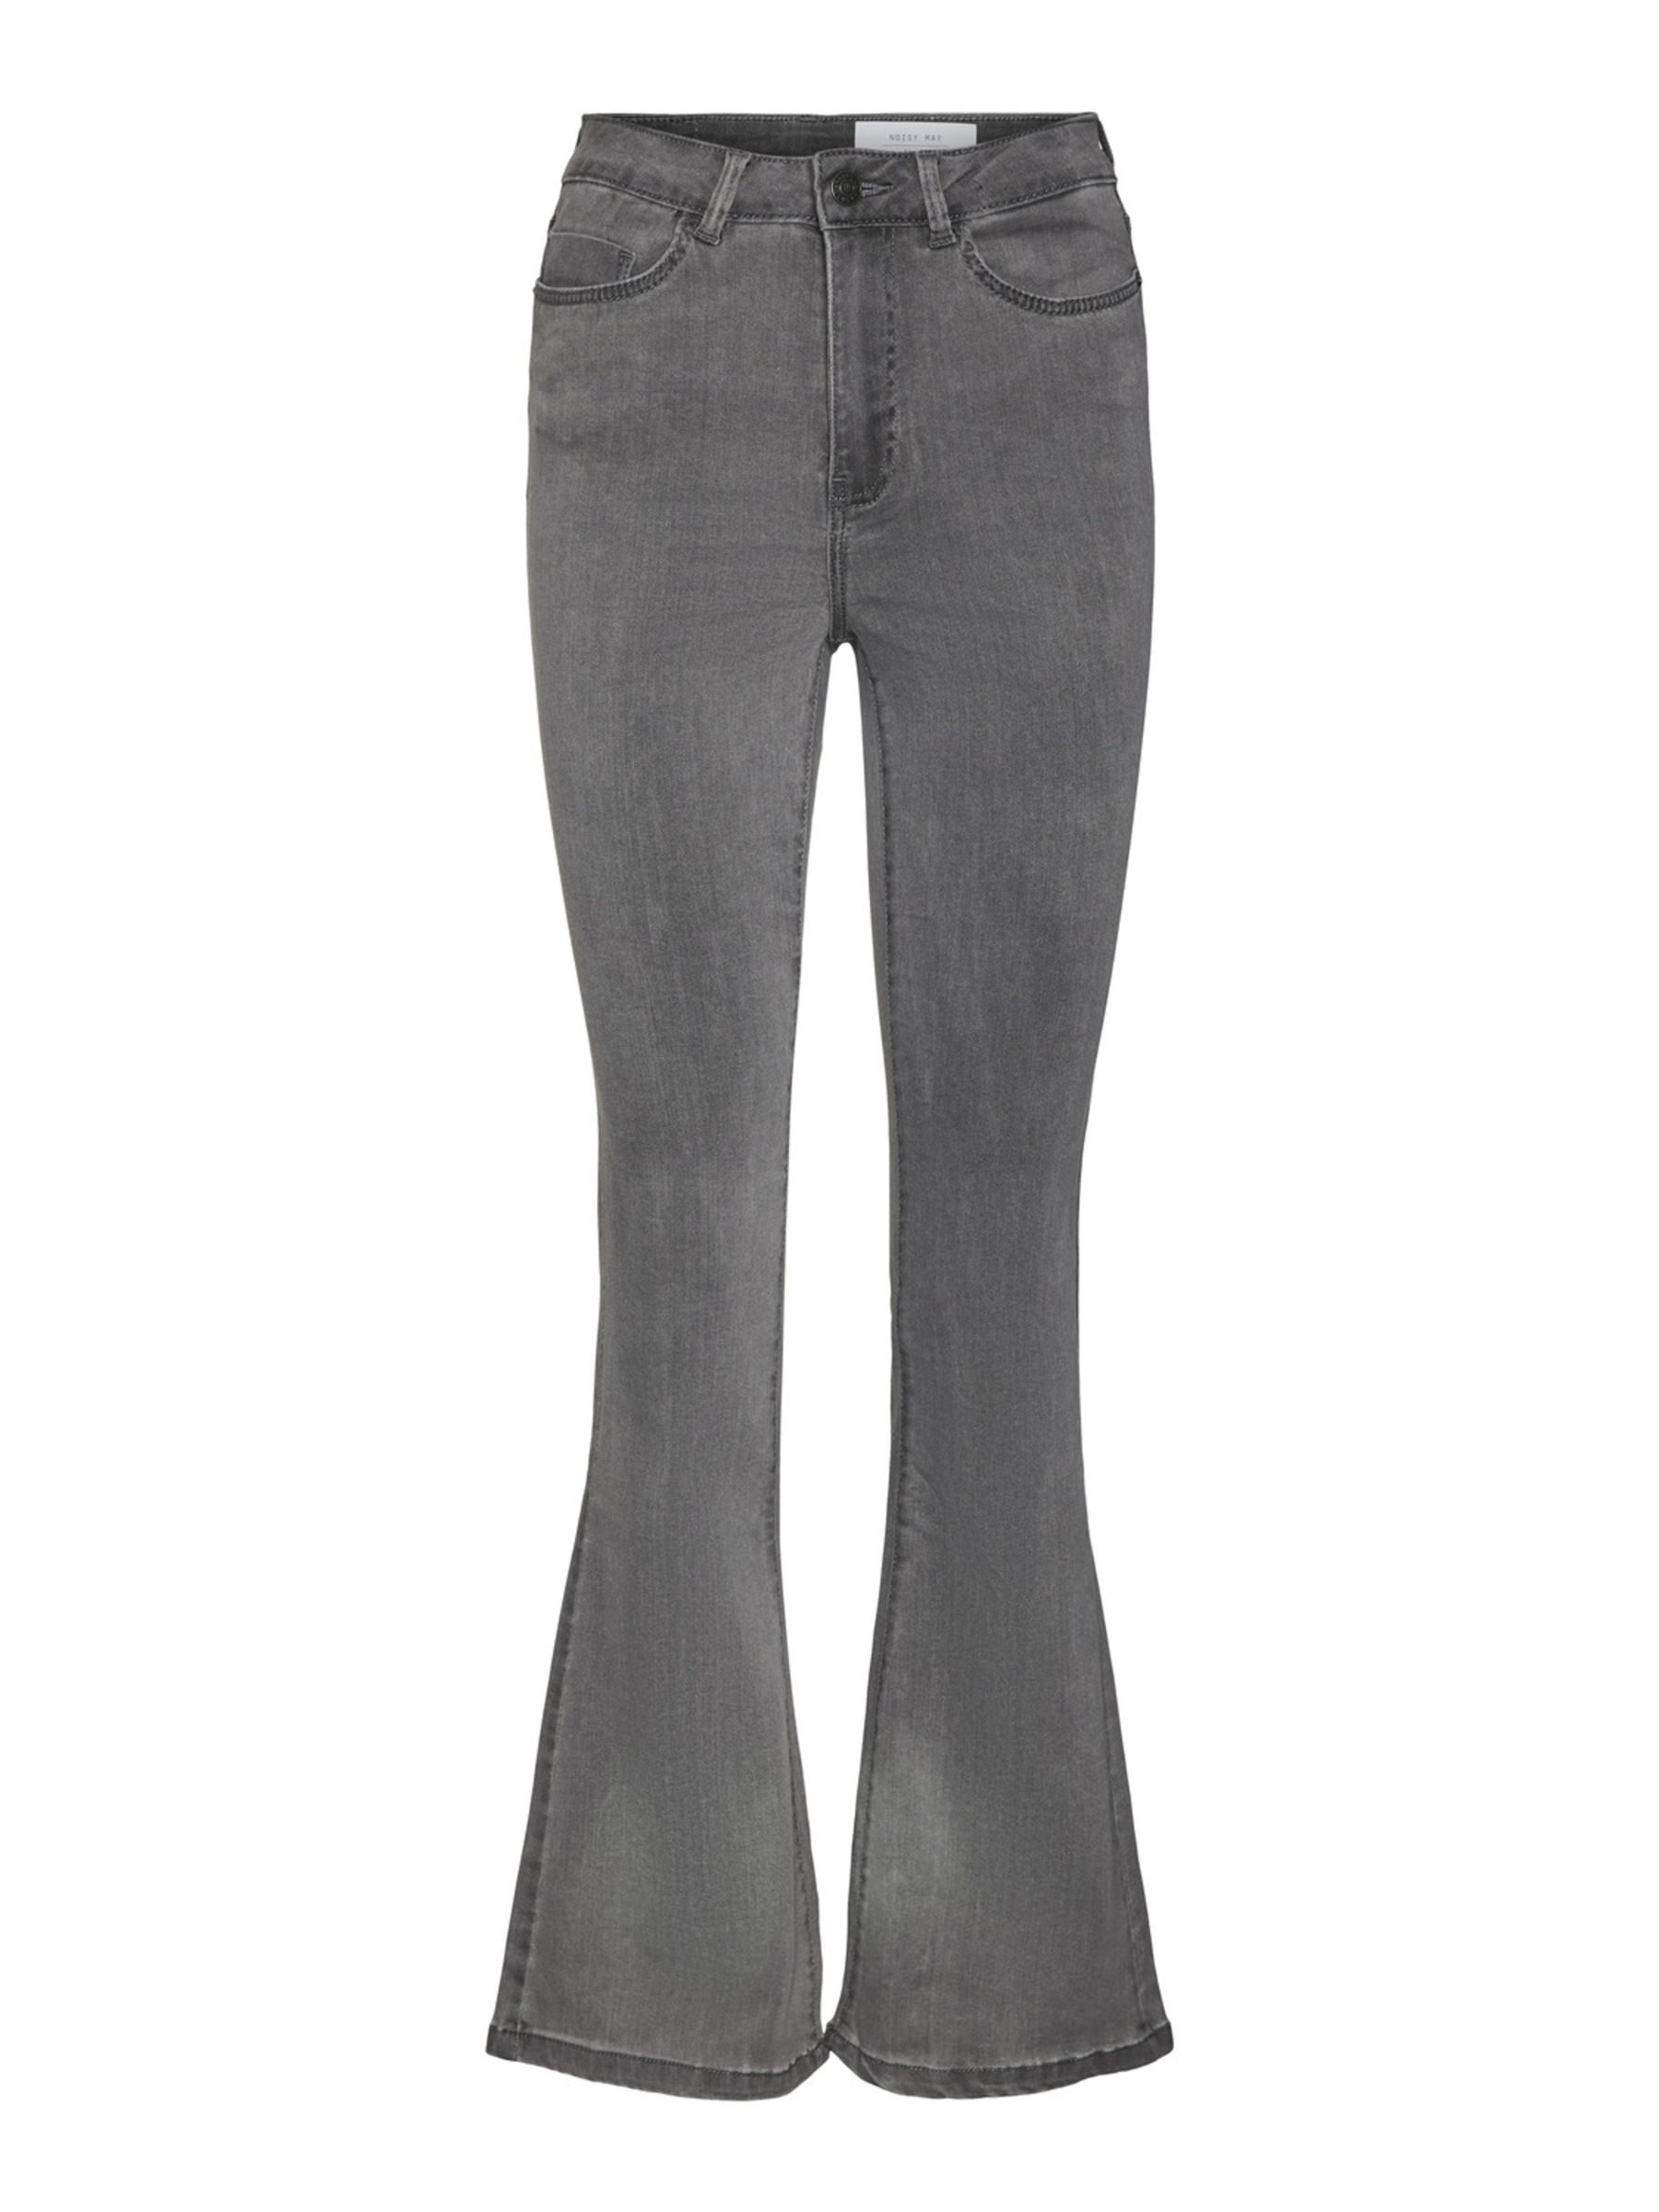 NMSALLIE HIGH WAISTED FLARED JEANS, Grey